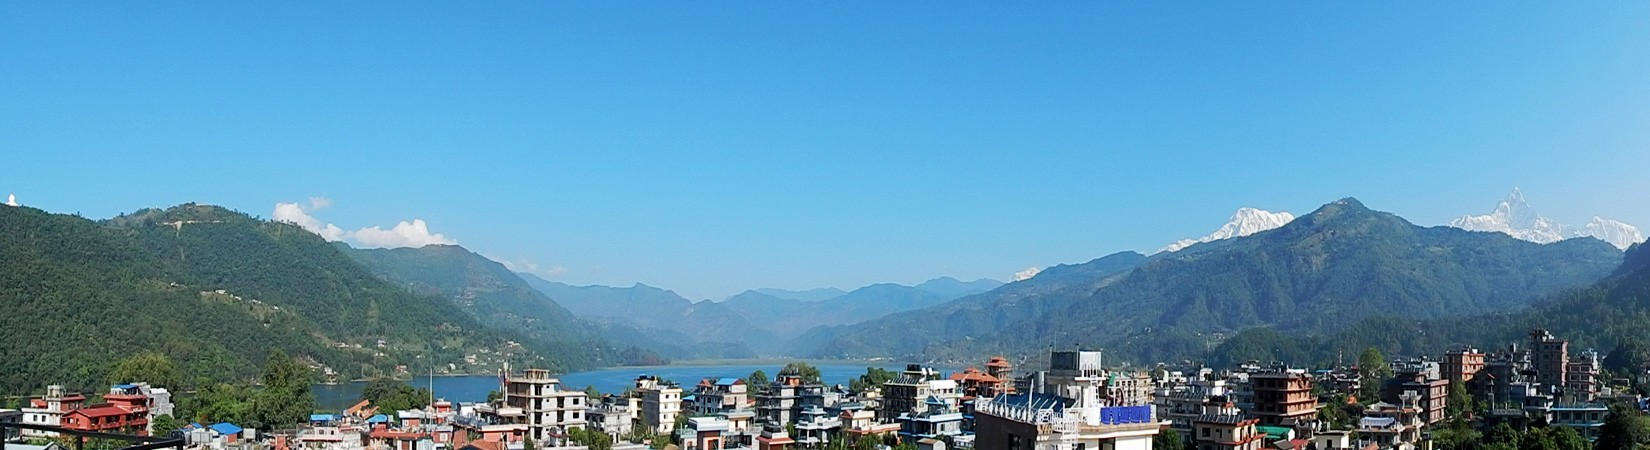 View From Our Hotel In Pokhara